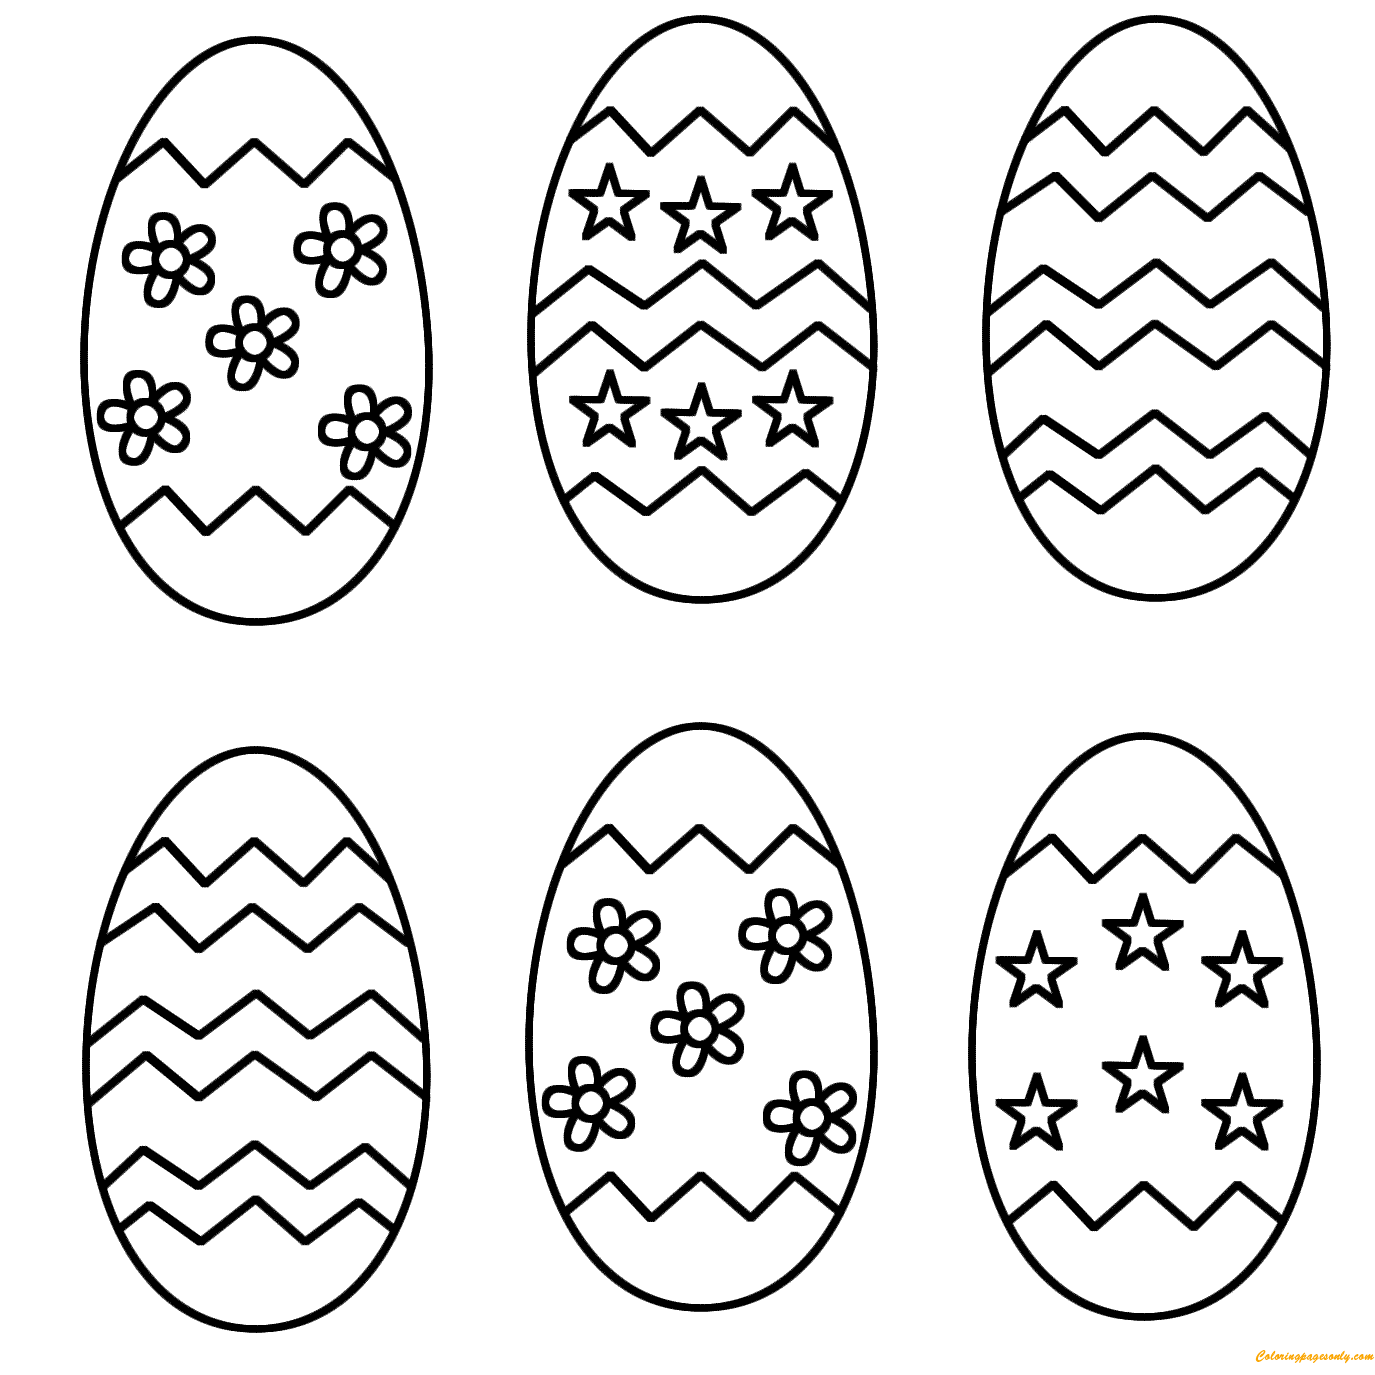 Six Easter Eggs Coloring Page